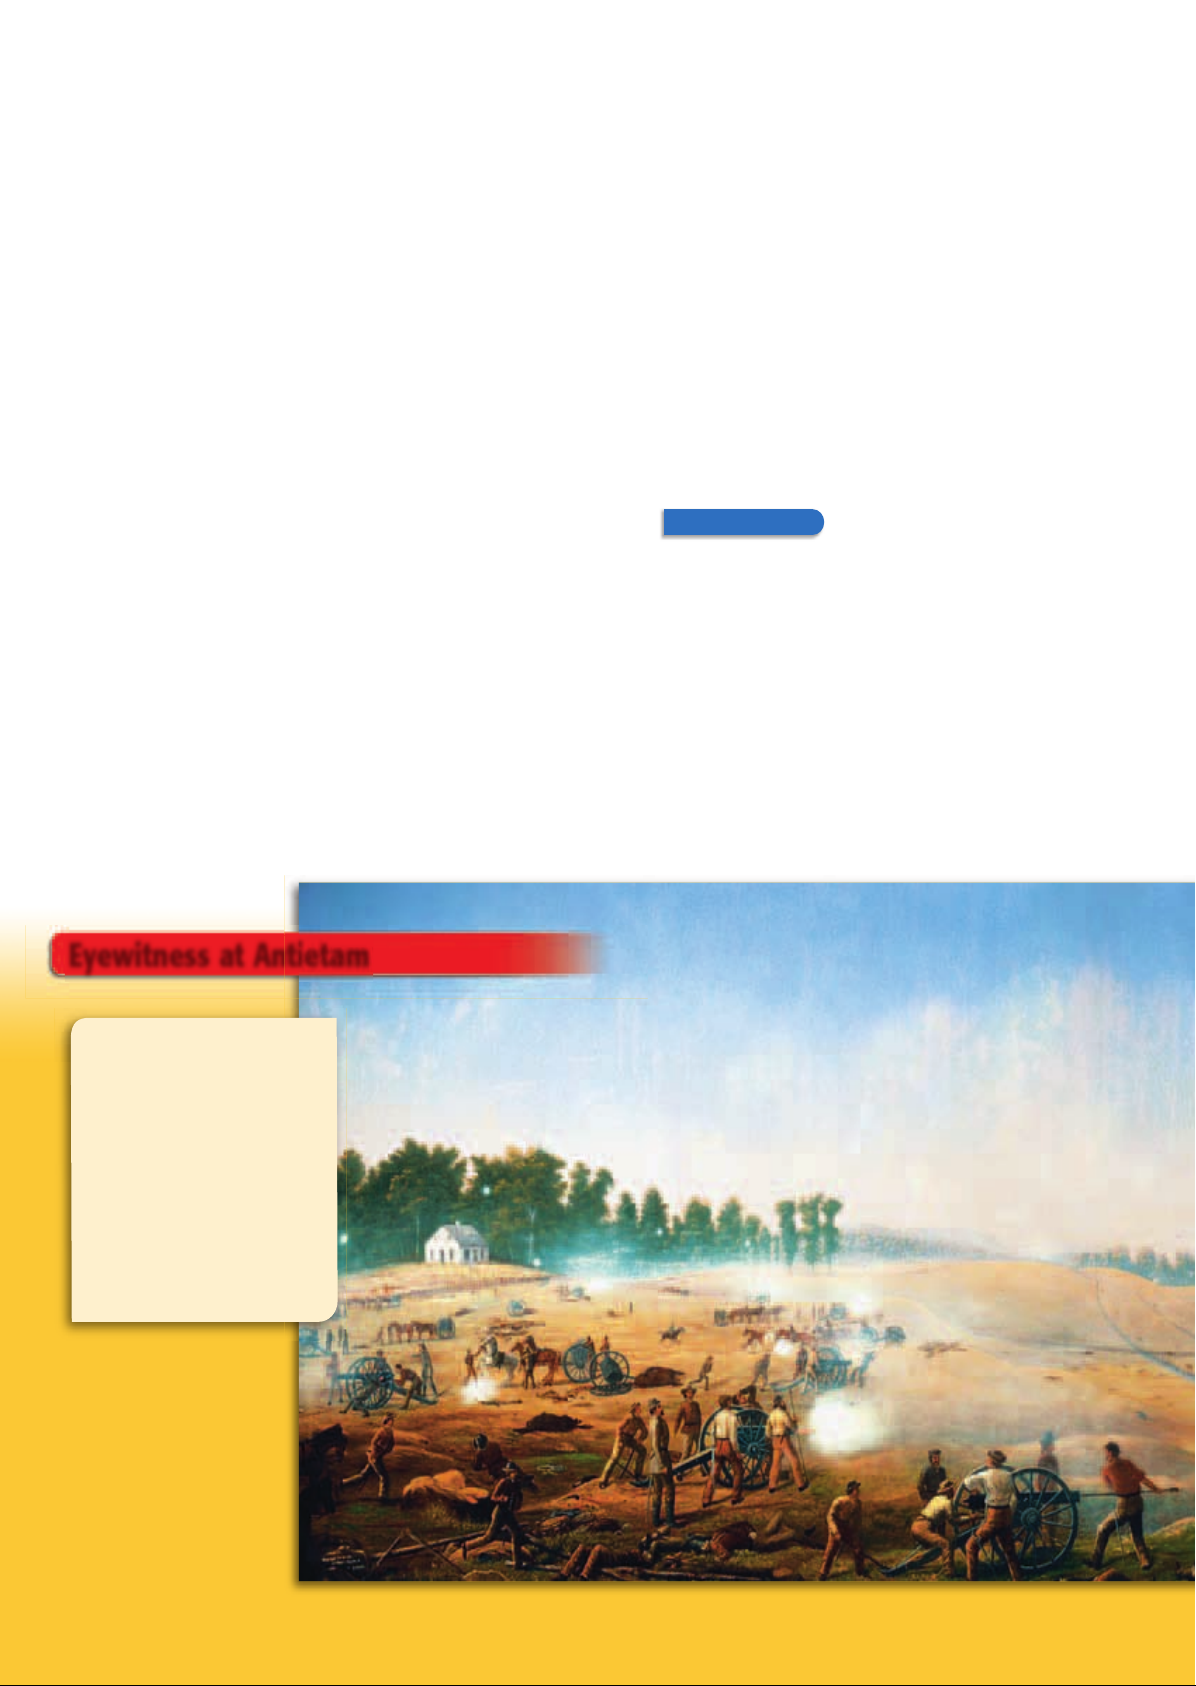 US_History_Textbook_8th_Grade_Chapter_15_The_Civil_War_h0BNFyV Image-10